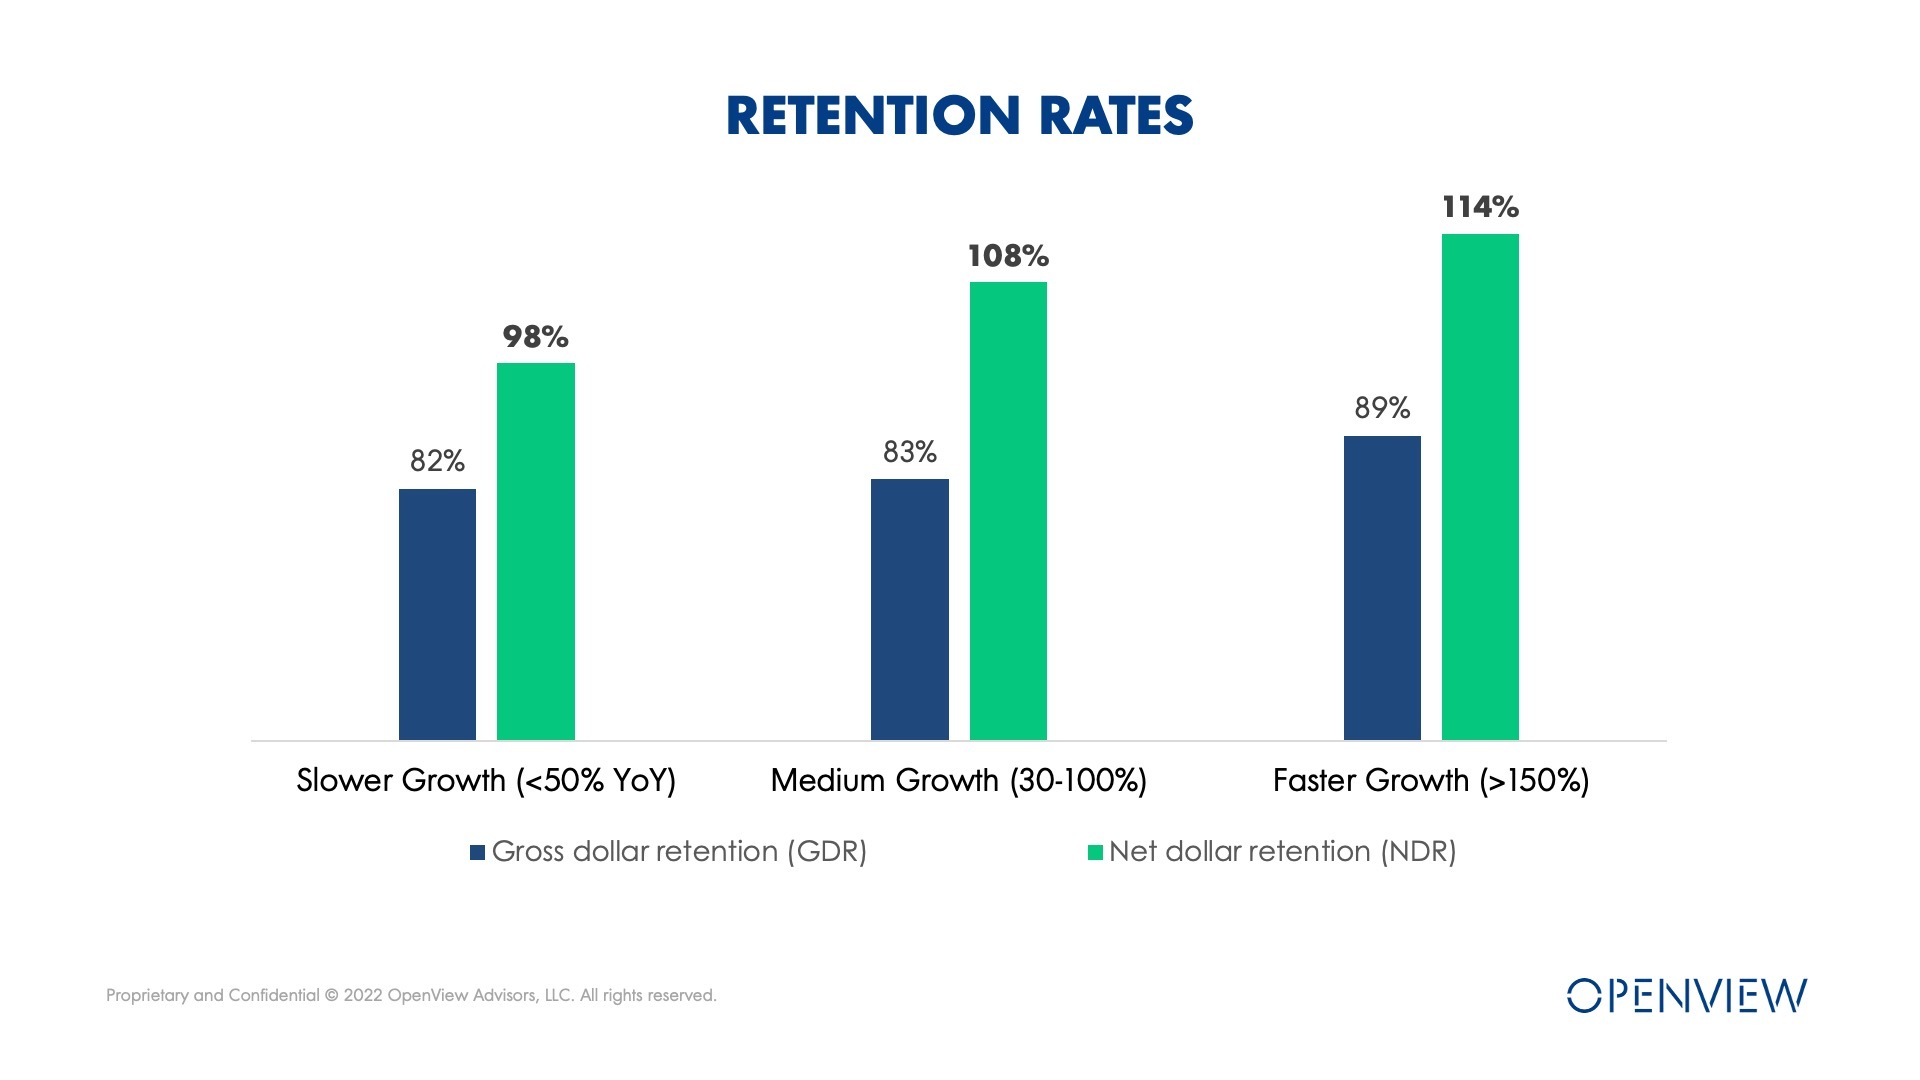 OpenView_4 Traits Traits of Fast Growing Companies_2022_Retention Rates